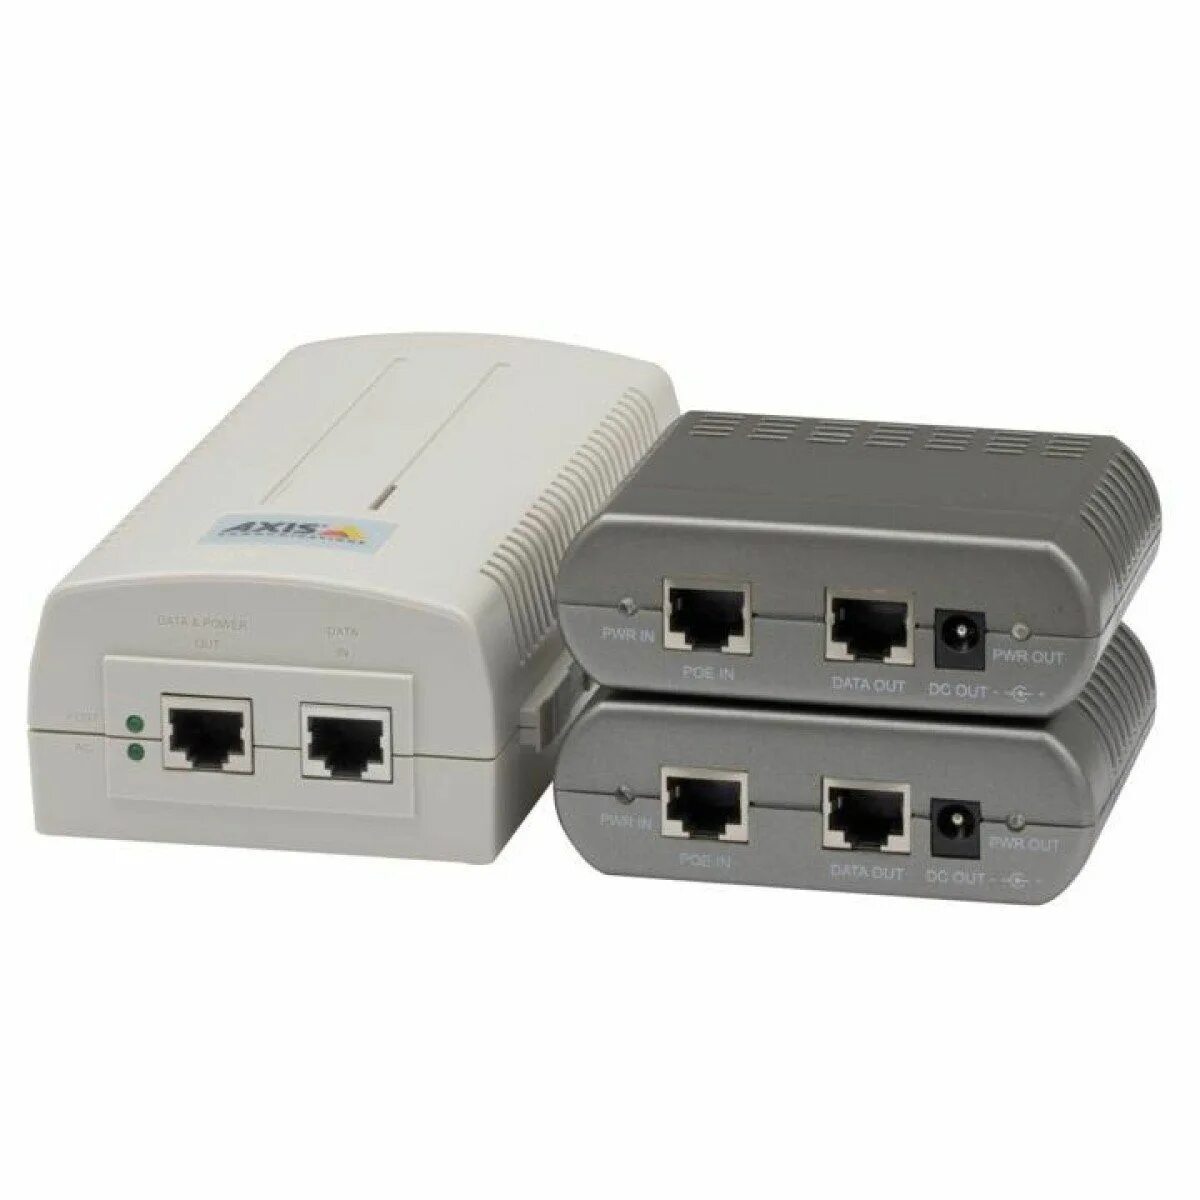 High poe. Axis t8123 High POE Midspan. Axis t8124 High POE 60w Midspan 1-Port. Axis t8123 High POE 30w. Инжектор POE Axis t8120 Midspan 1-Port 5026-202.